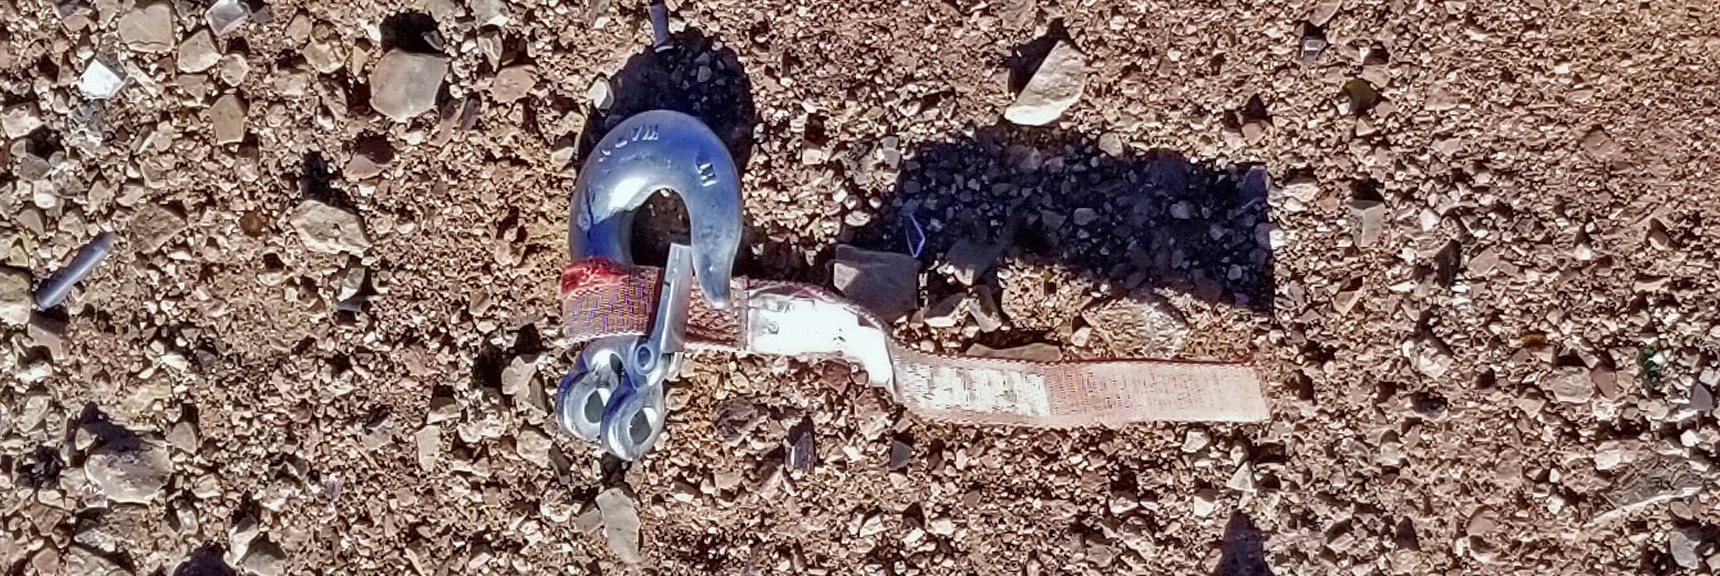 Old Carabiner Found on Lucky Strike Rd. Used to Help Vehicles Up That First Incline? | Angel Peak via Lucky Strike Road | Mt Charleston Wilderness | Spring Mountains, Nevada